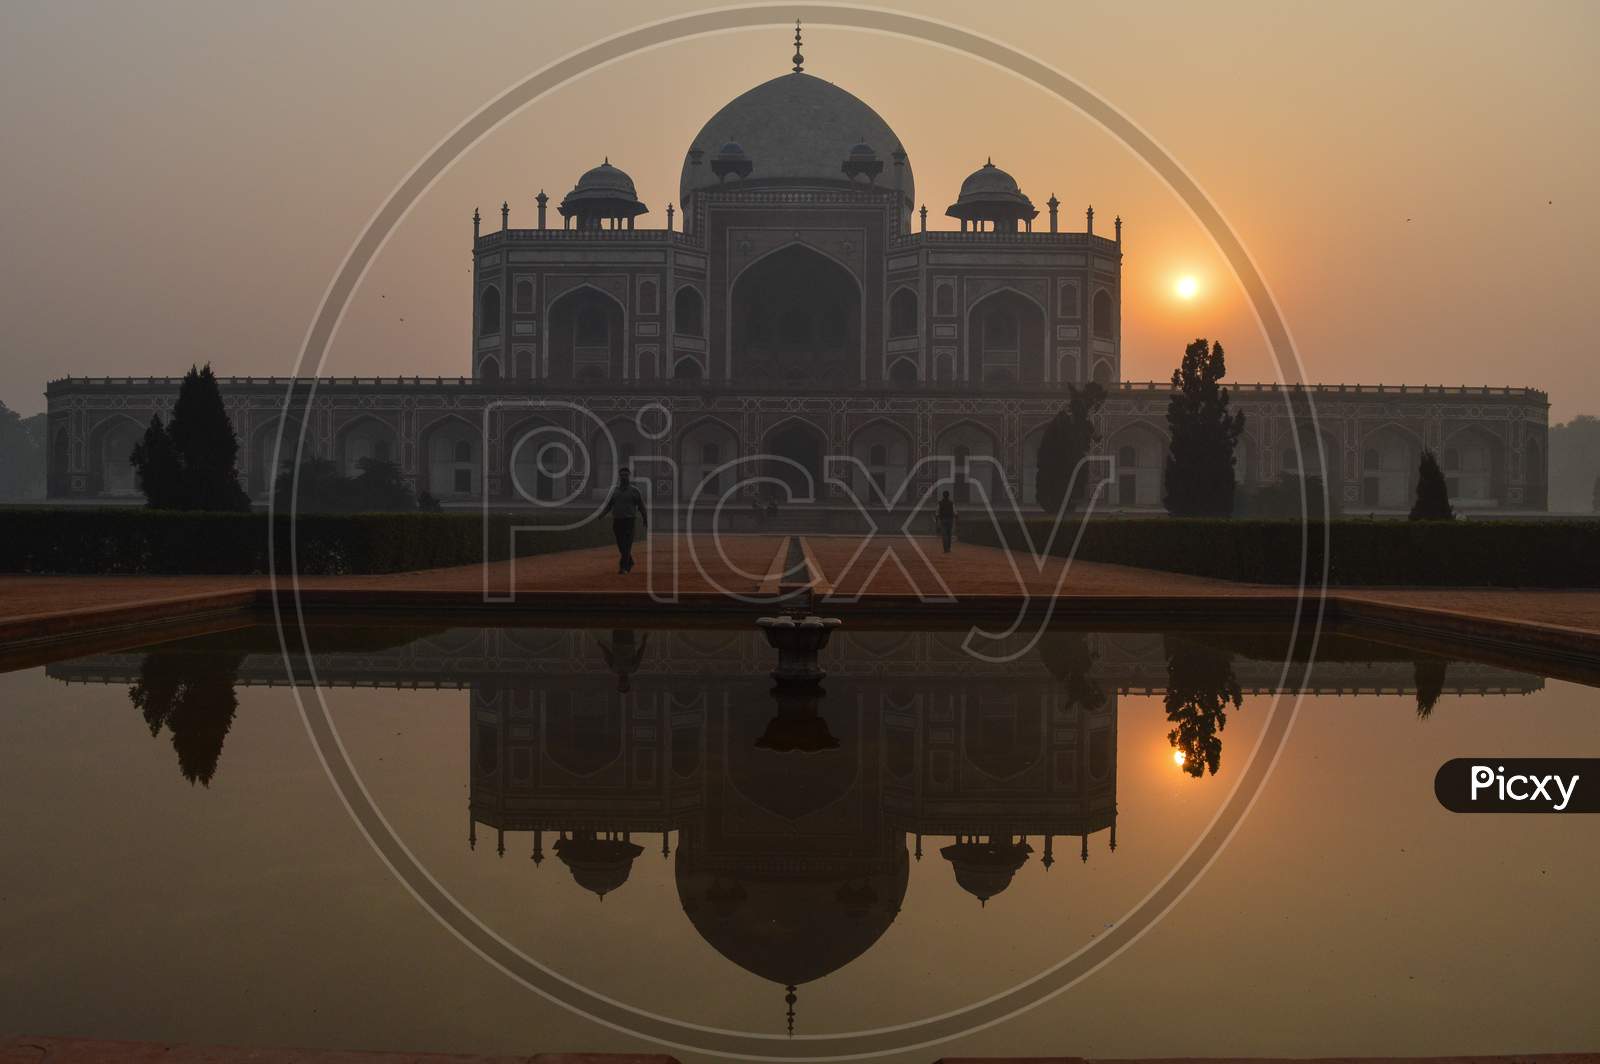 A Reflection In Water And Mesmerizing View Of Humayun Tomb Memorial From The Main Gate,Entrance At Winter Foggy Morning.